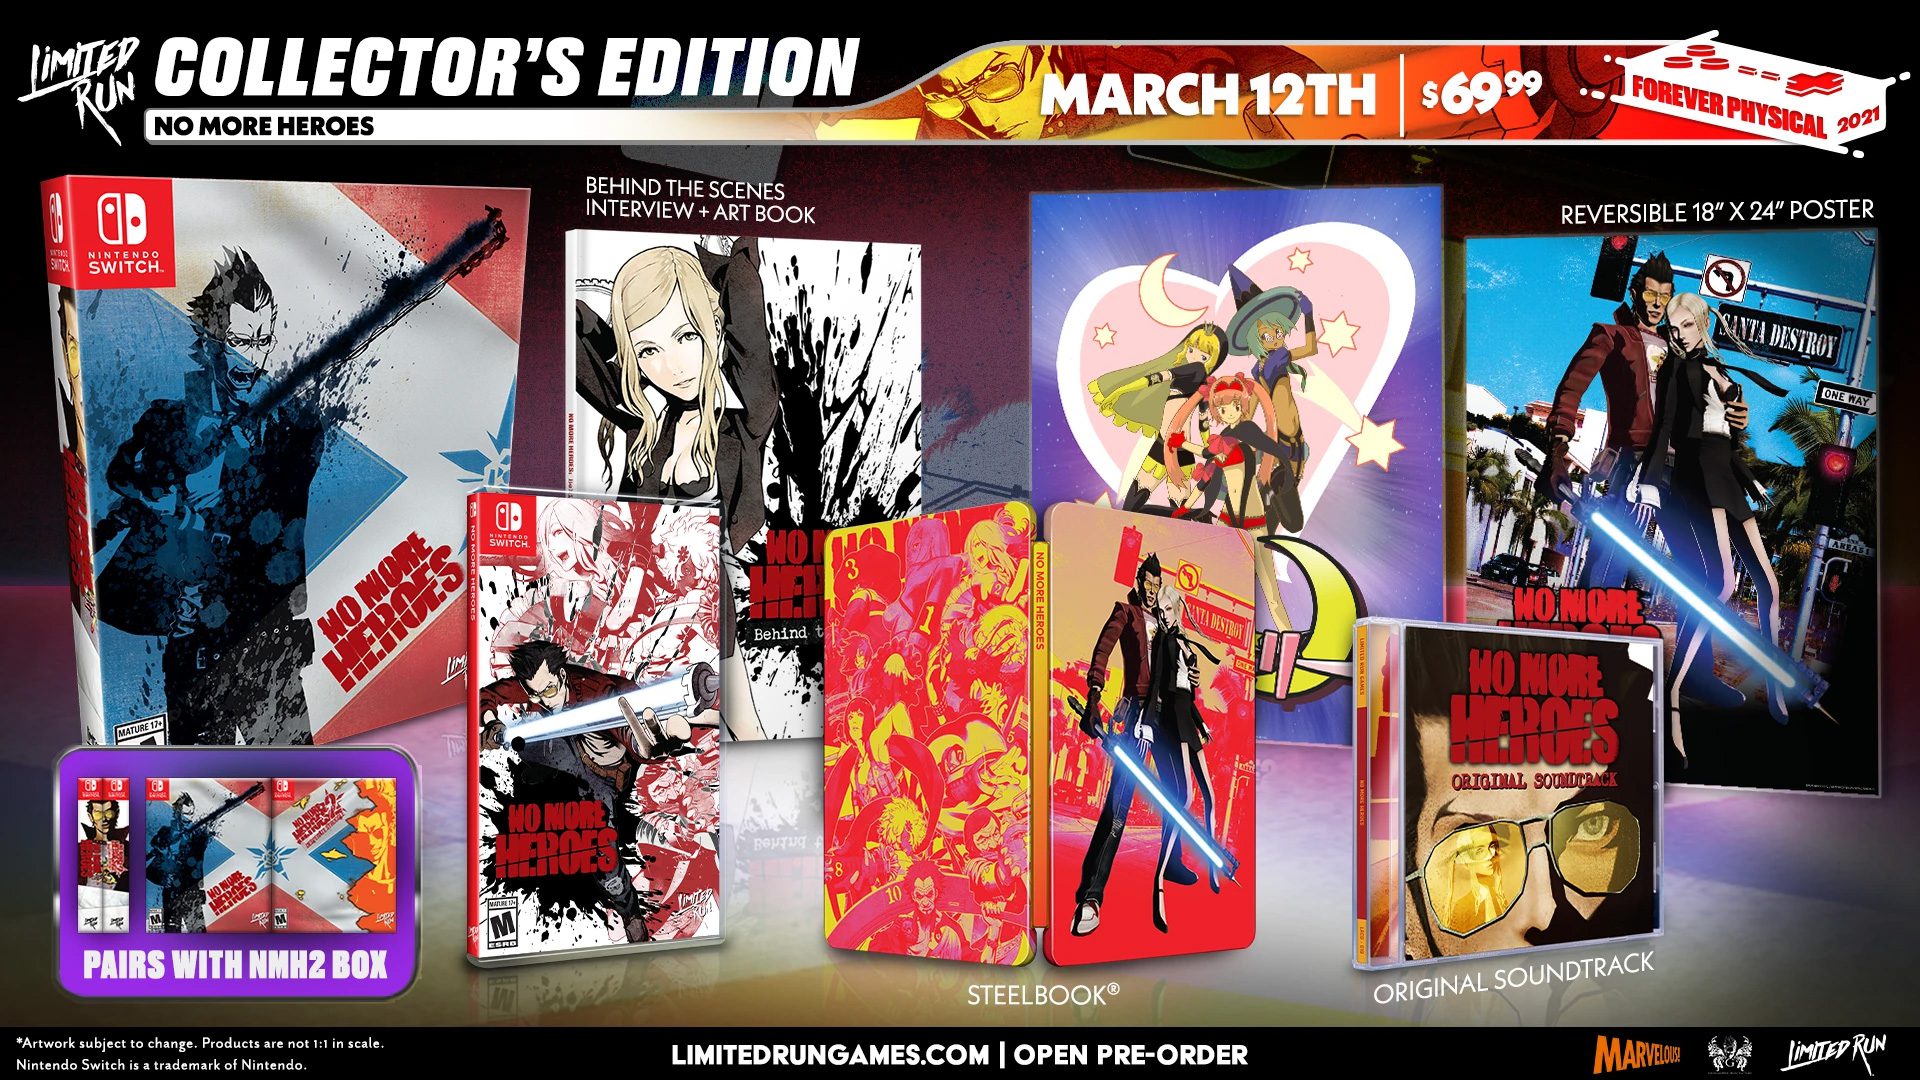 Limited Run's No More Heroes Switch Collector's Edition goes on sale March 12, 2021.